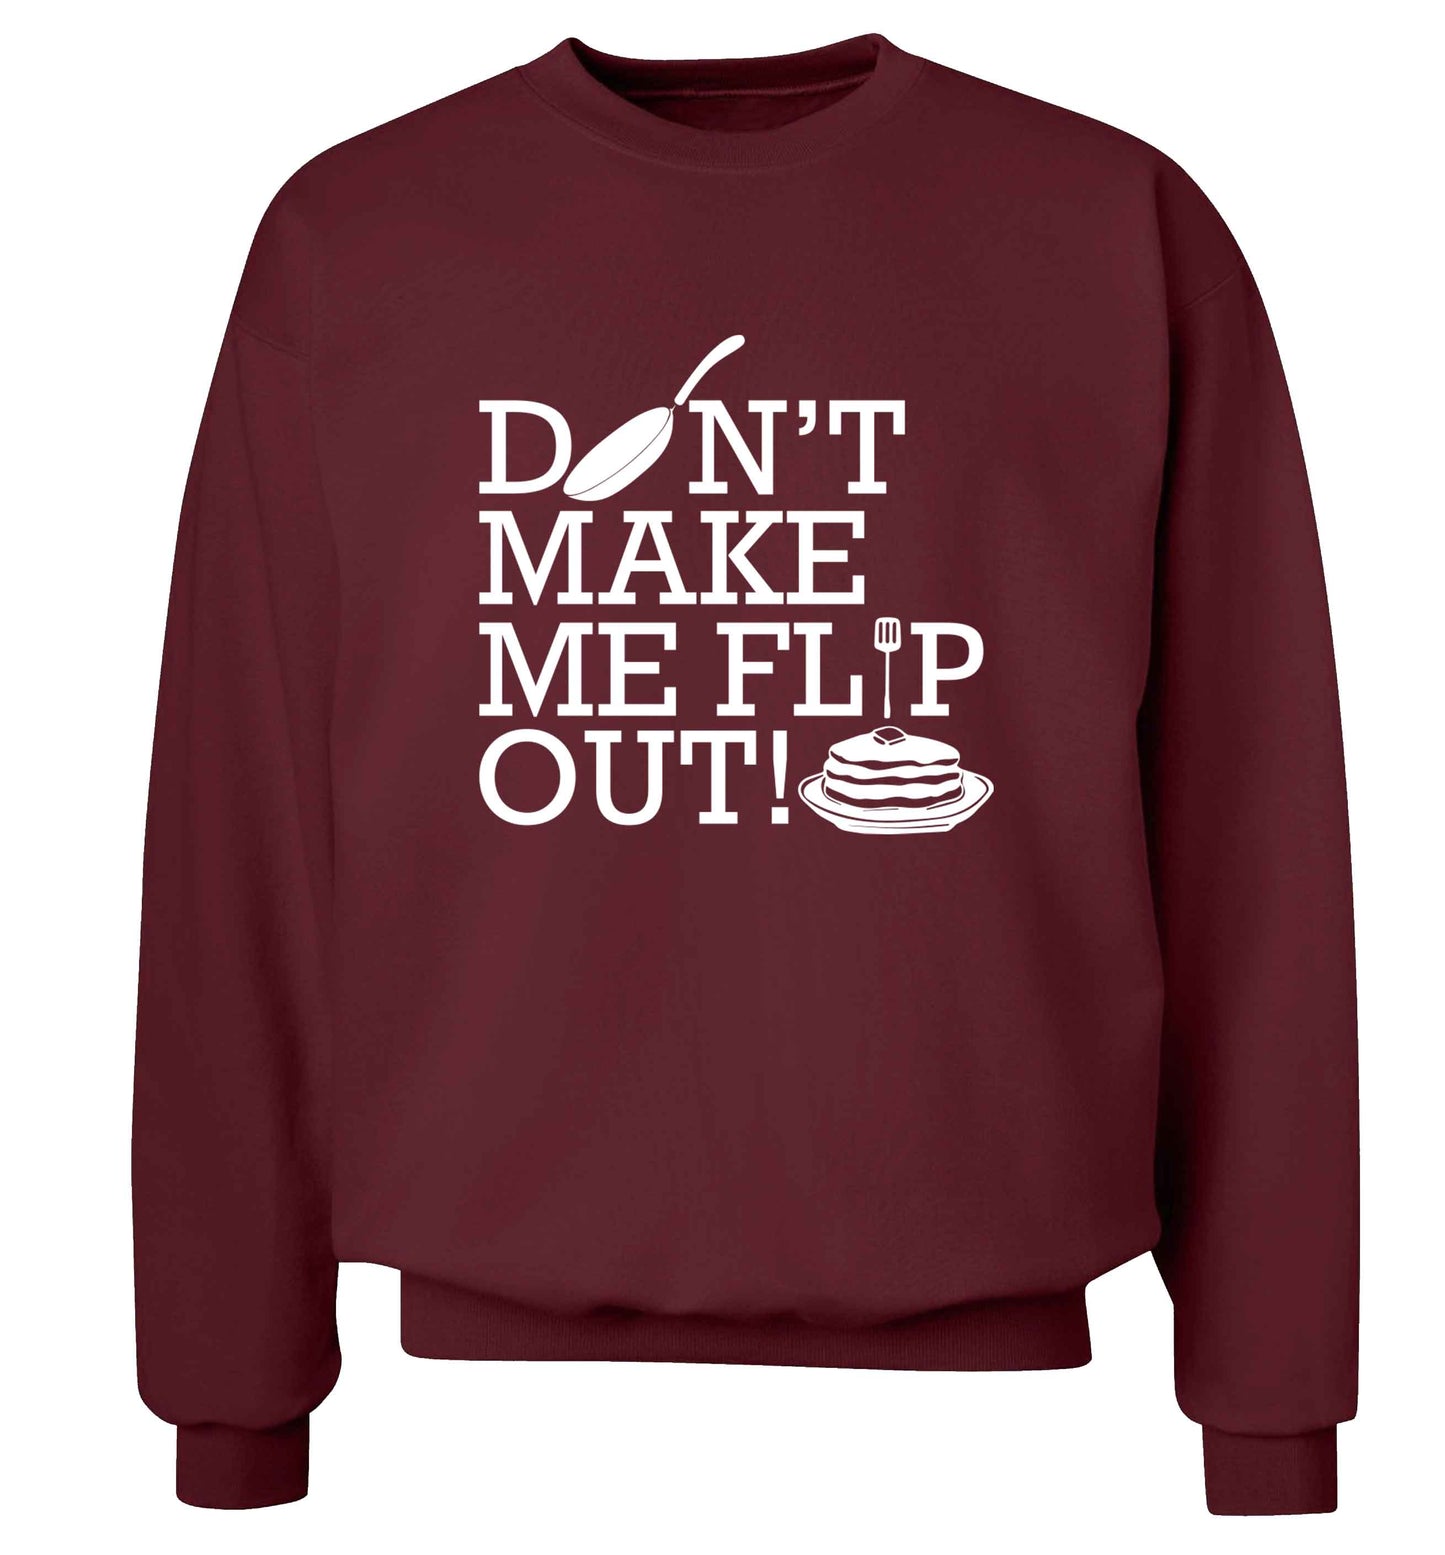 Don't make me flip out adult's unisex maroon sweater 2XL